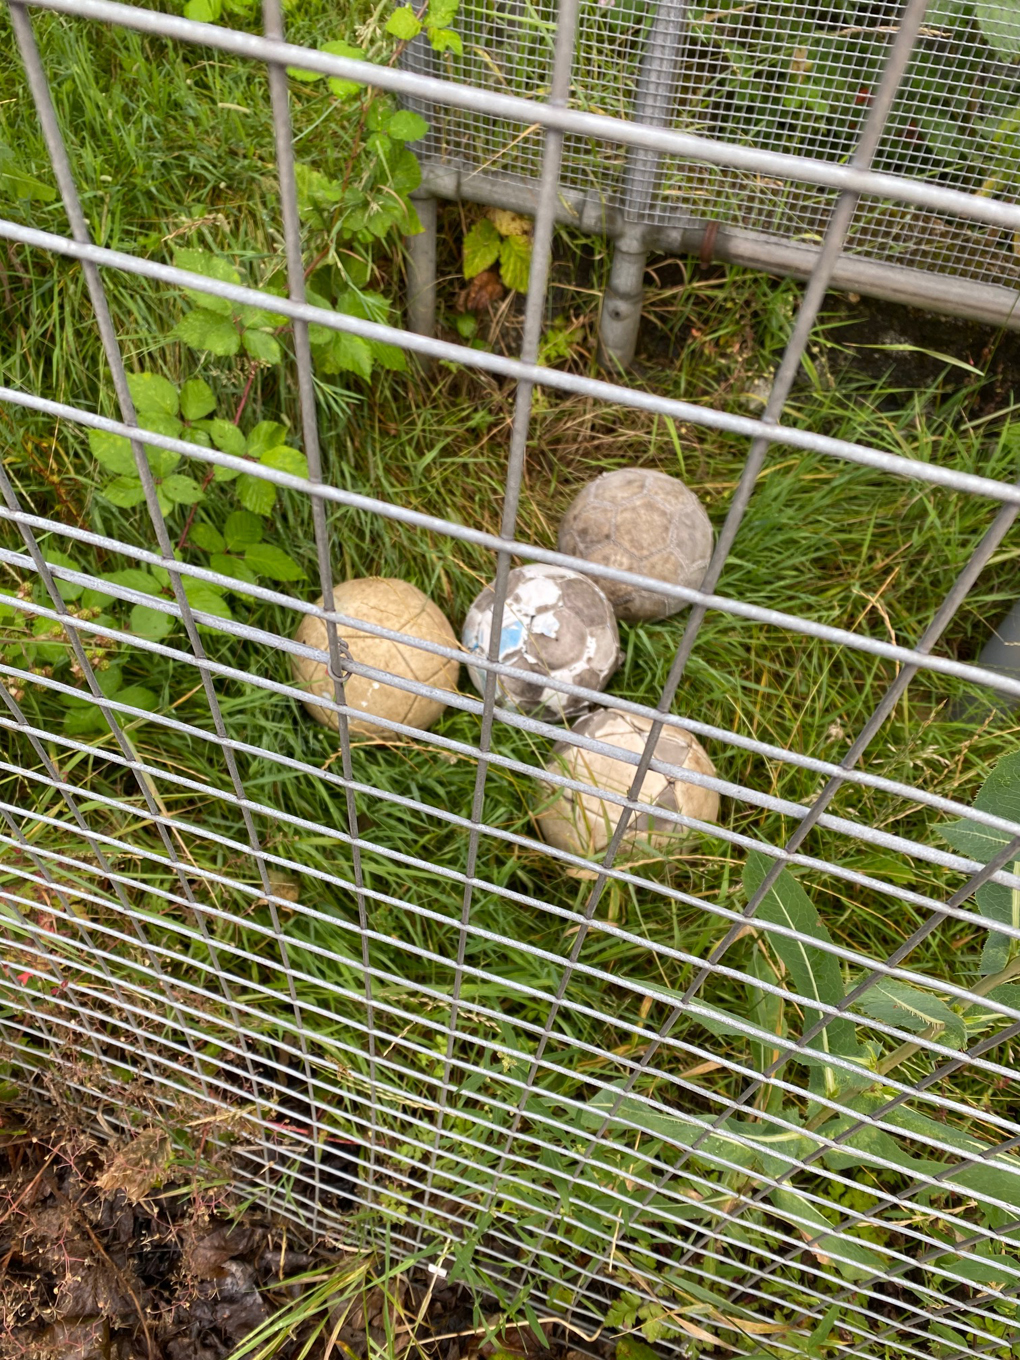 Four scruffy footballs lying in a clearing. They look like giant eggs in a nest.